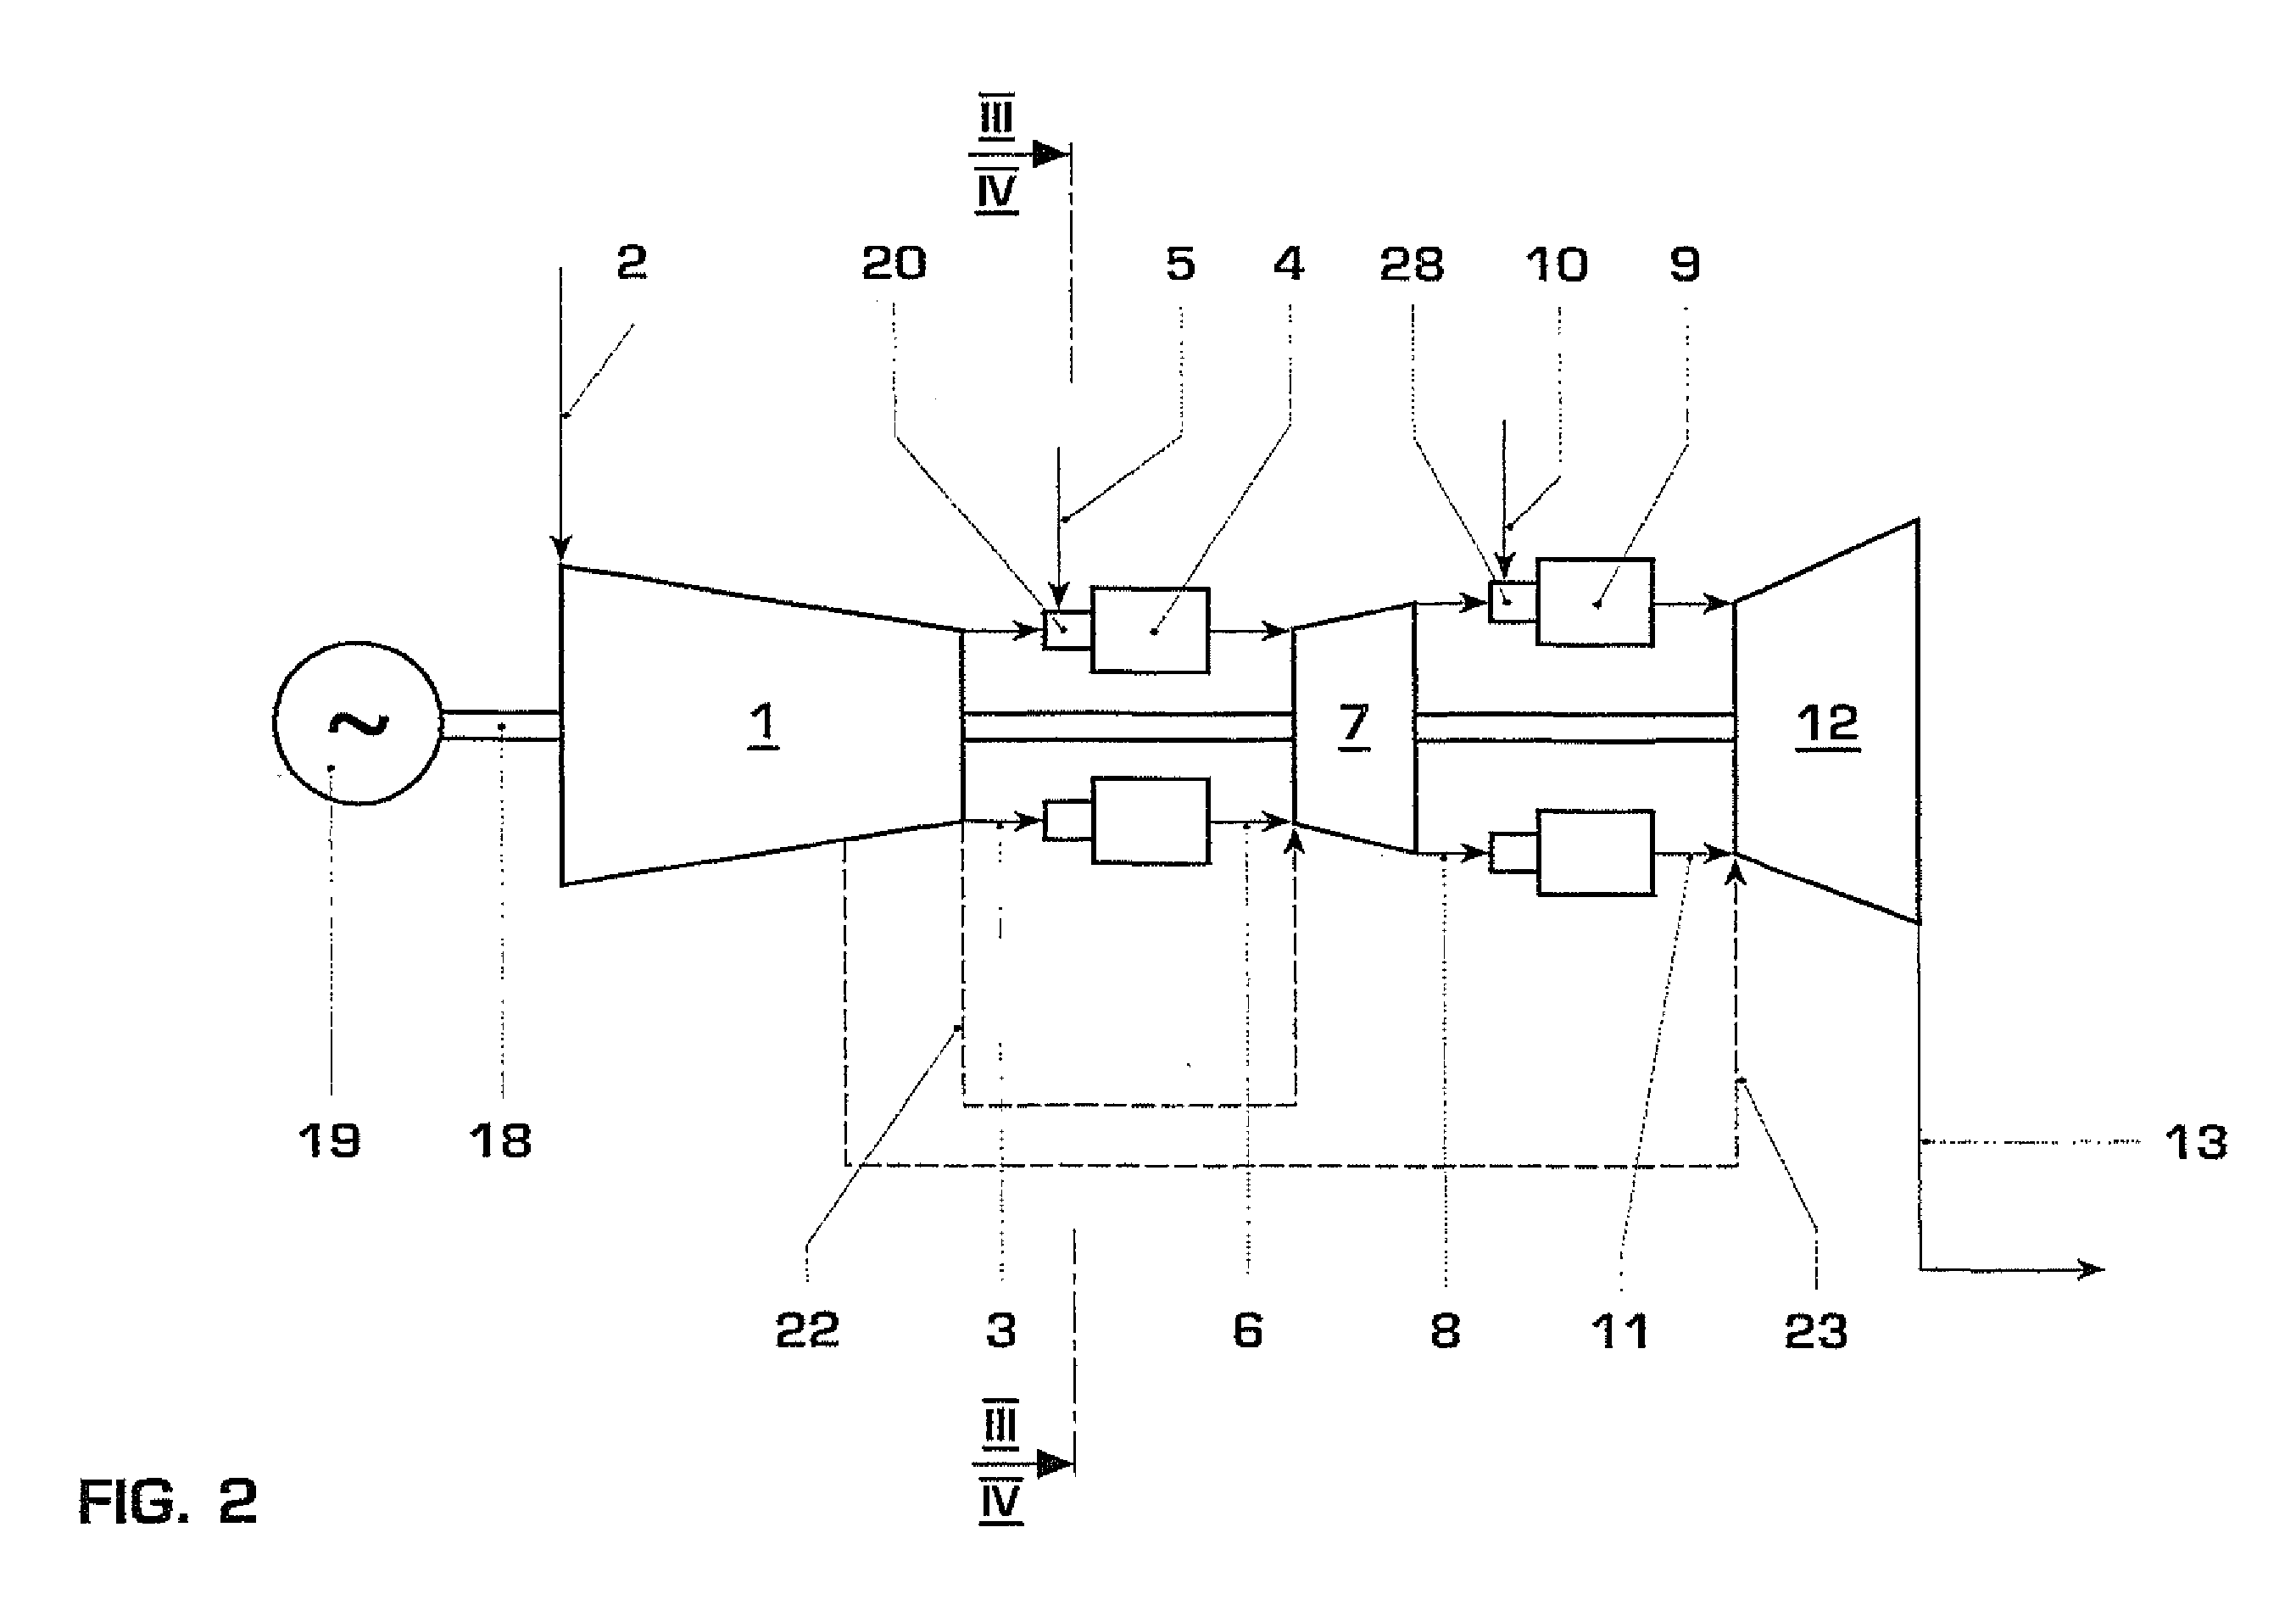 Gas turbine with water injection